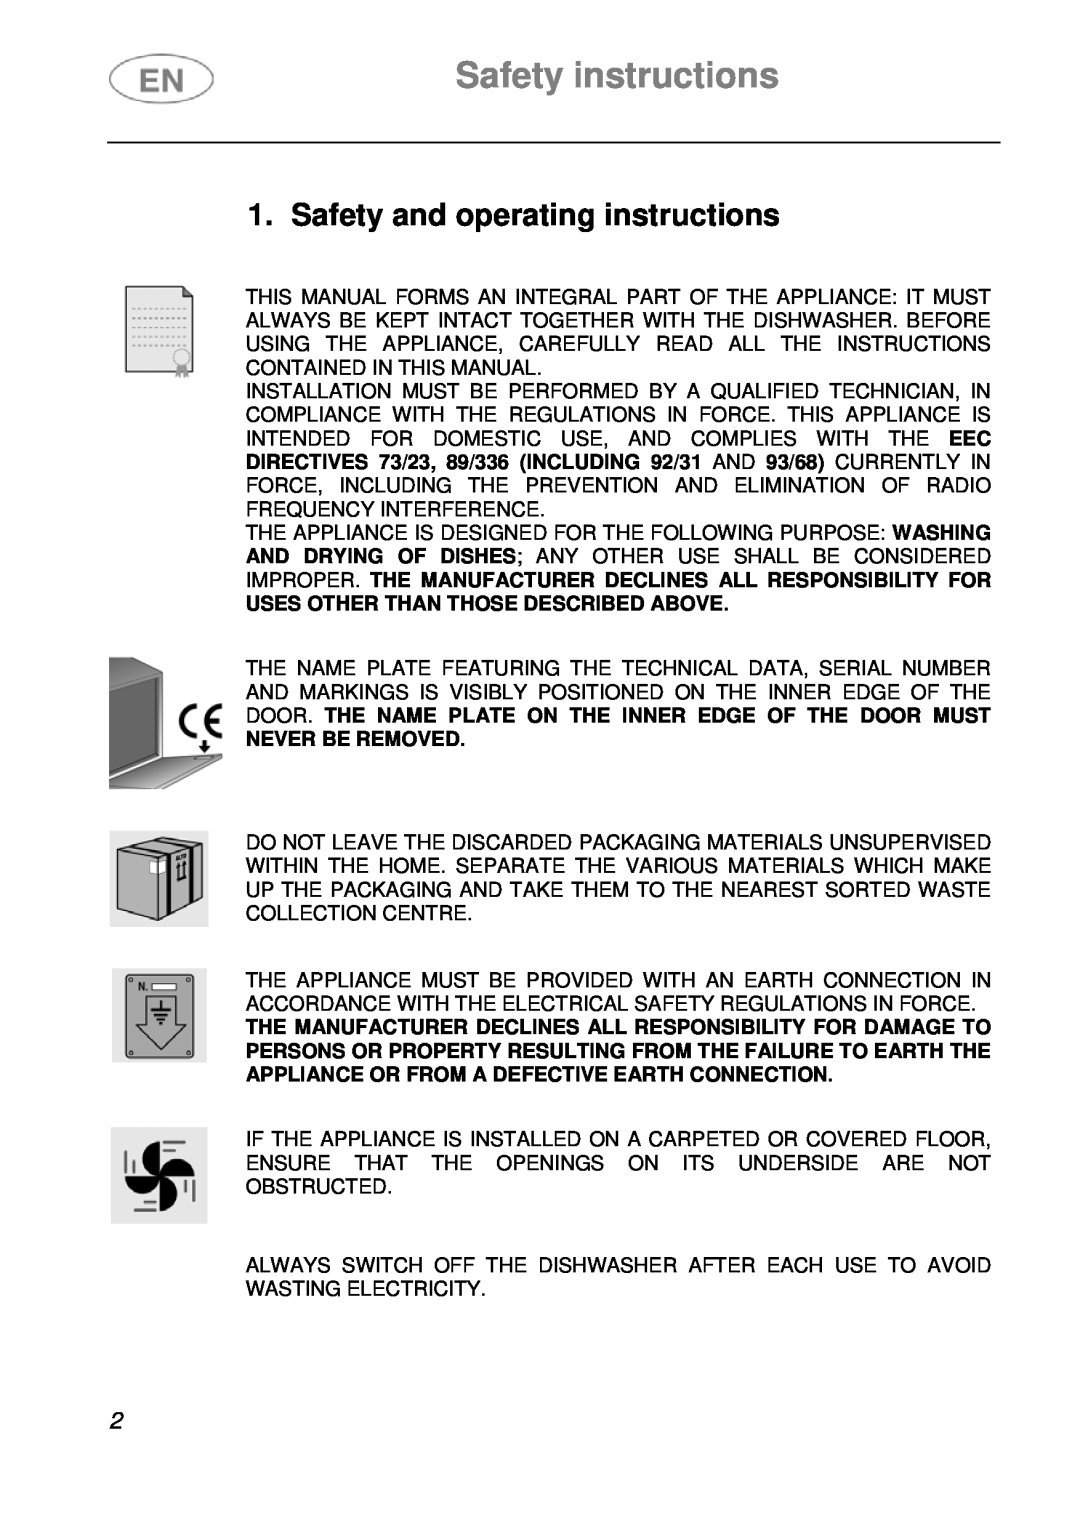 CDA WC460 manual Safety instructions, Safety and operating instructions 